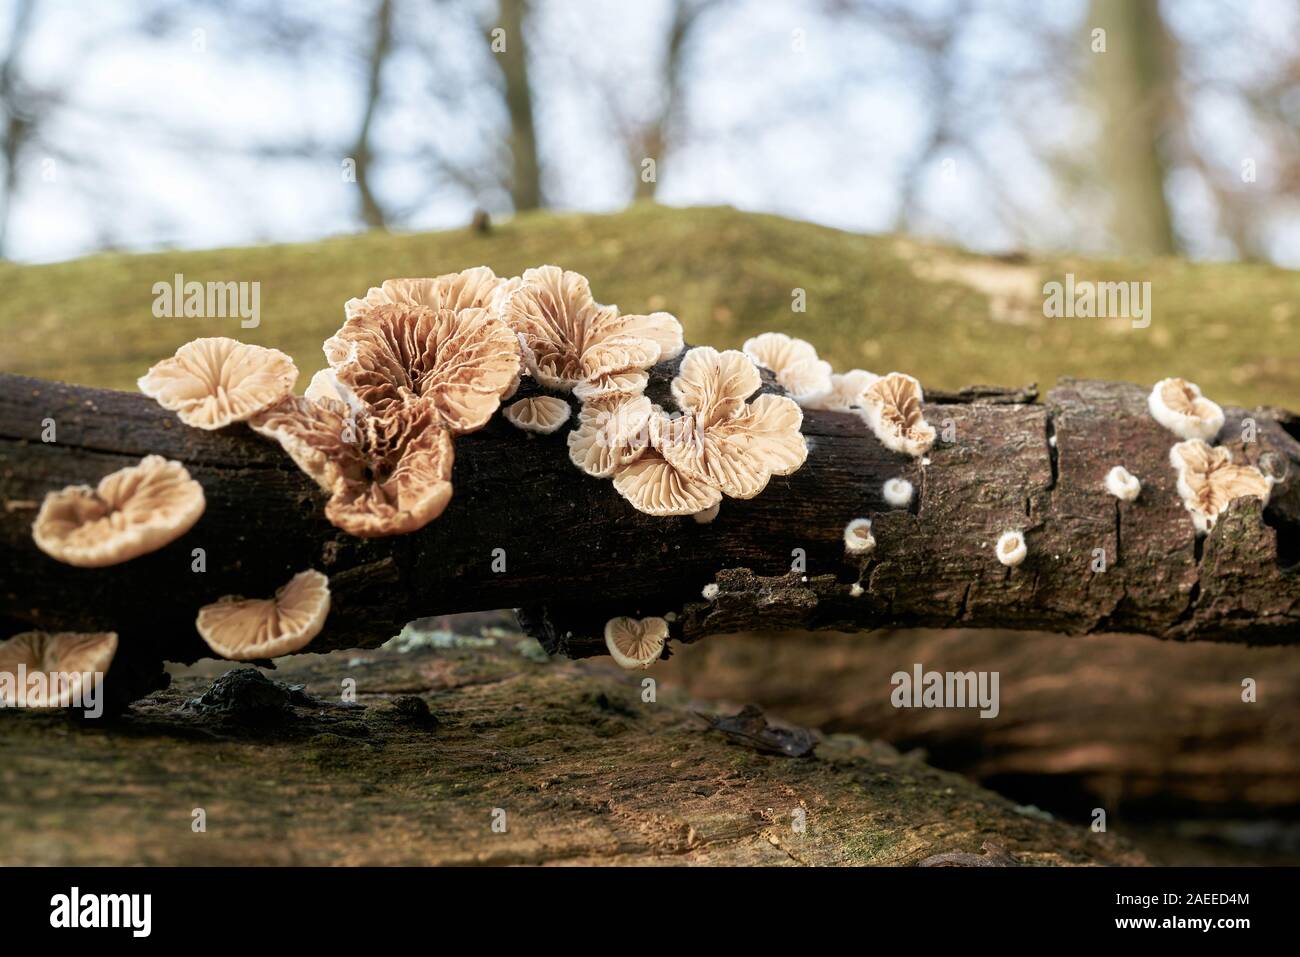 split gill fungus (Schizophyllum commune) on a dead tree trunk in the forest Stock Photo